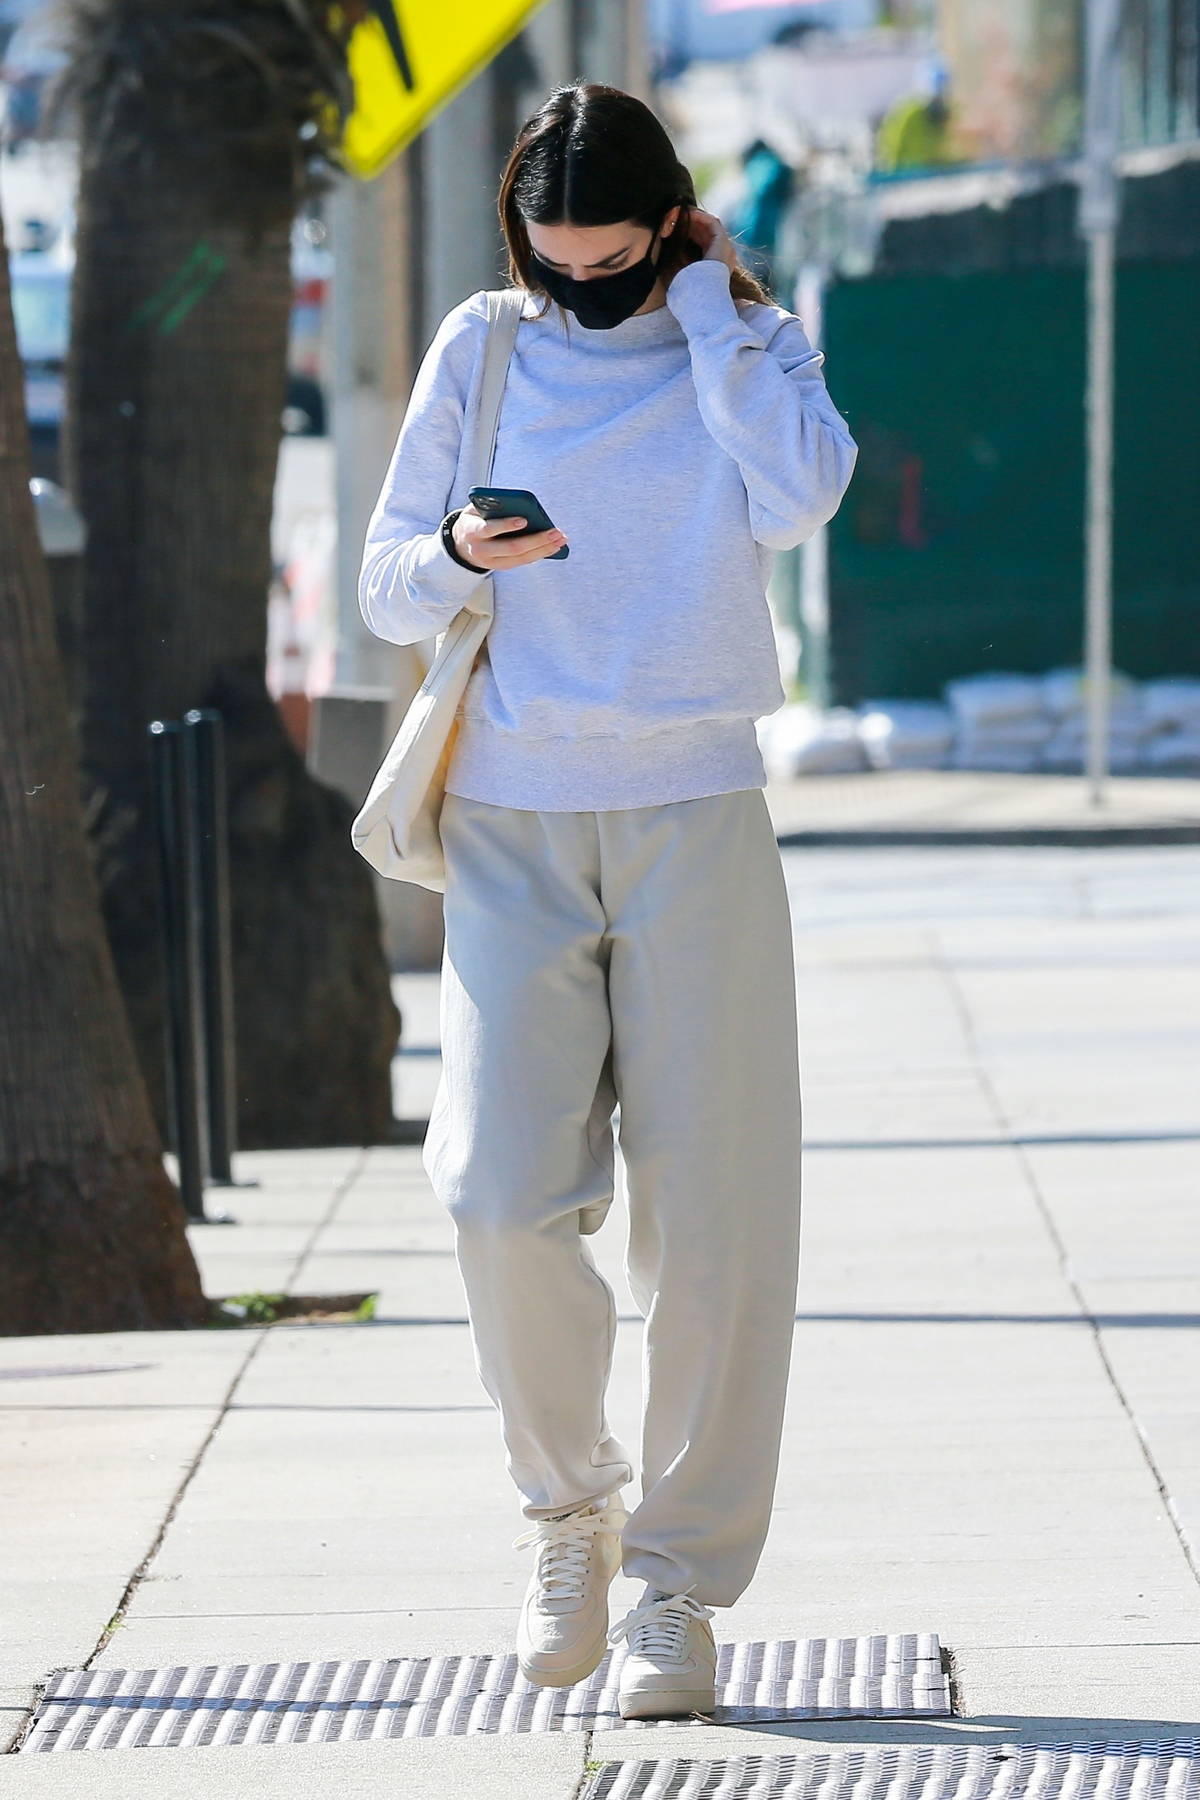 Kendall Jenner looks cozy in sweats during her trip to a doctor's